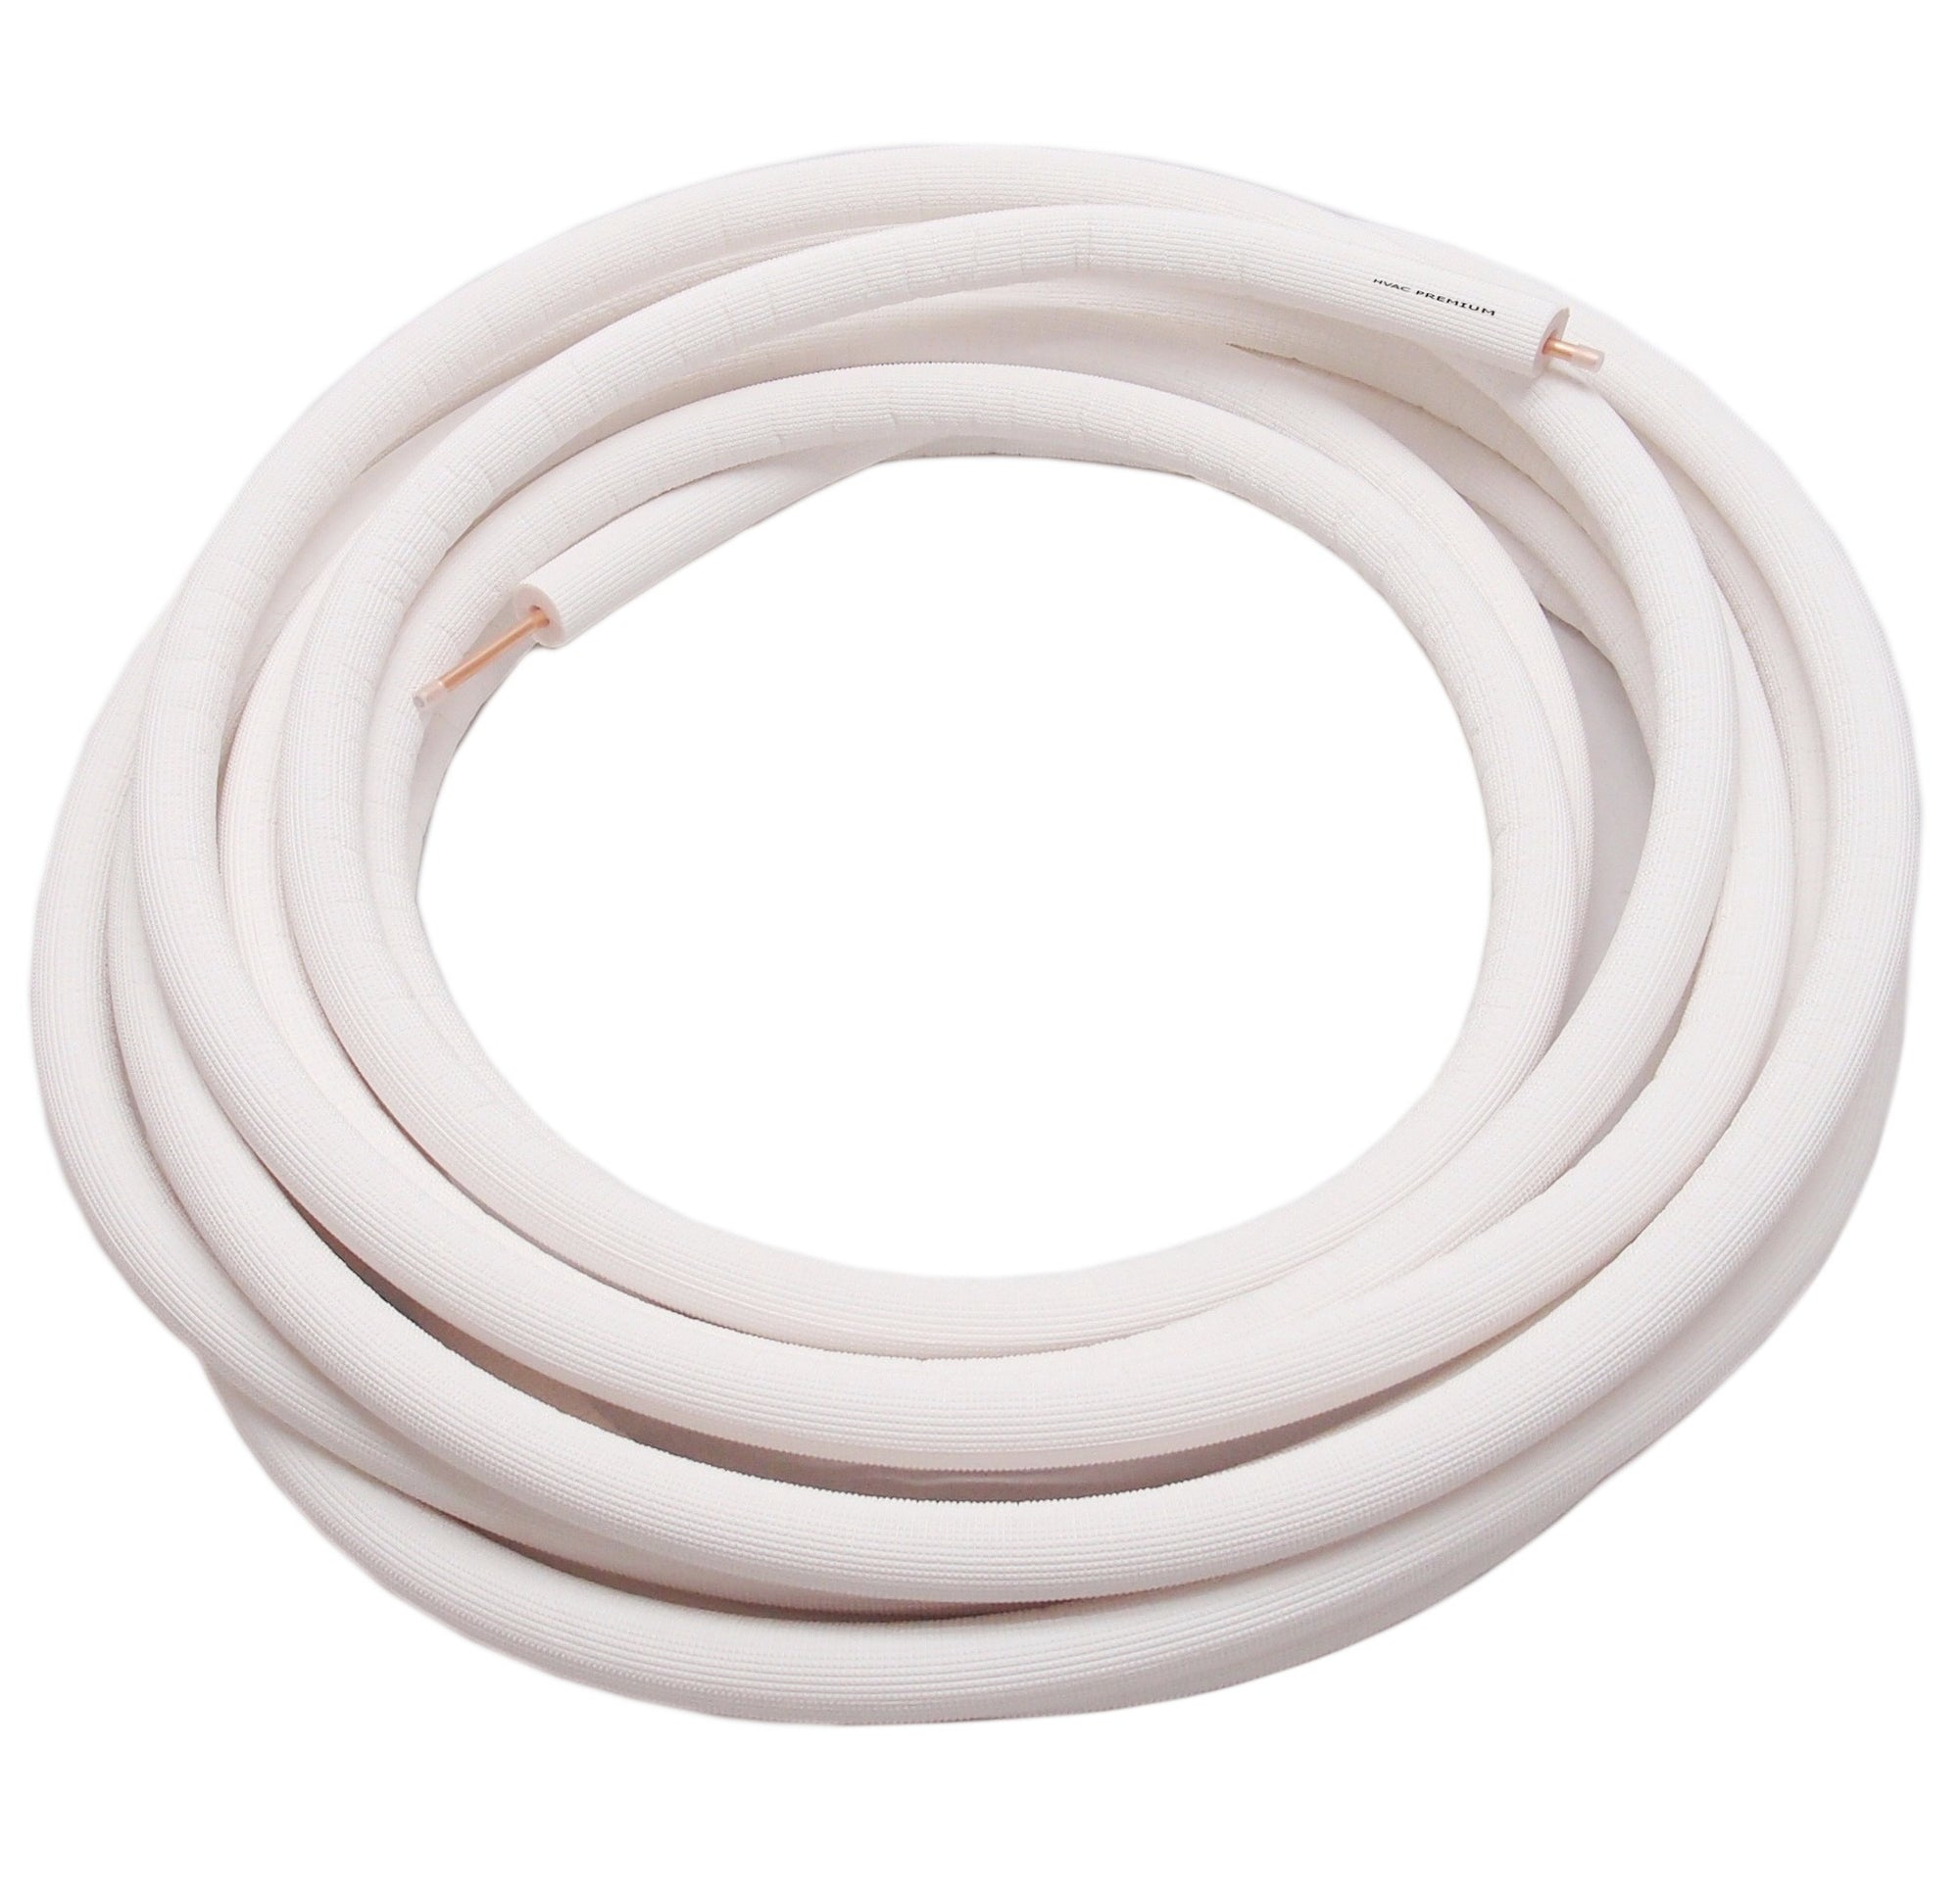 1/4" Insulated Copper Coil Line - Seamless Pipe Tube for HVAC, Refrigerant - 1/2" White Insulation - 25' Long